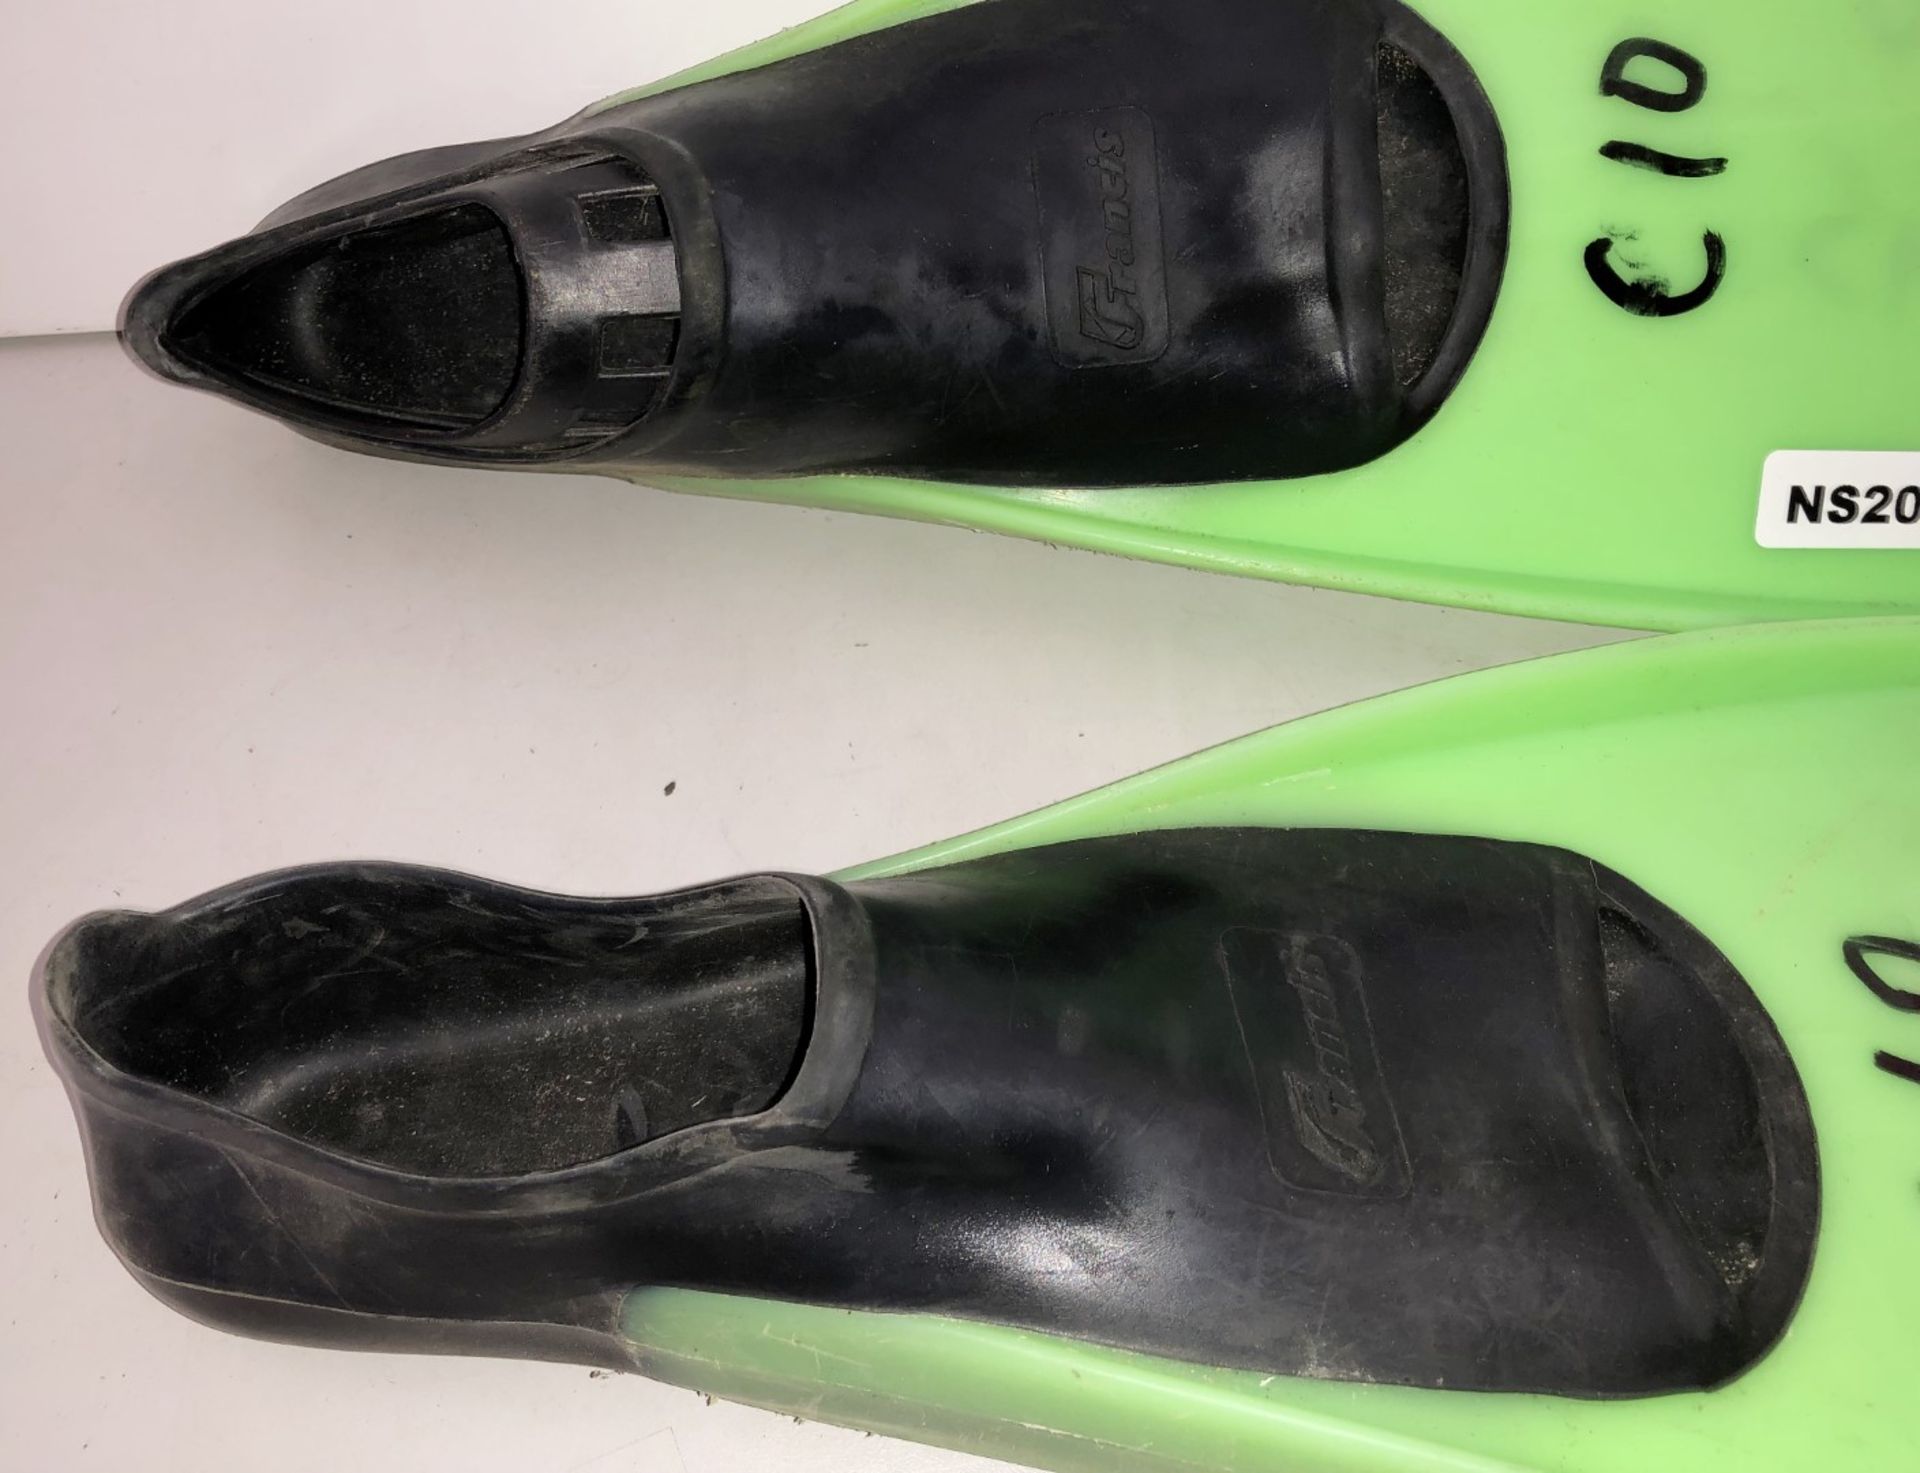 2 x Pairs Of Size 9-10 Diving Fins - CL349 - Altrincham WA14 - Image 5 of 10